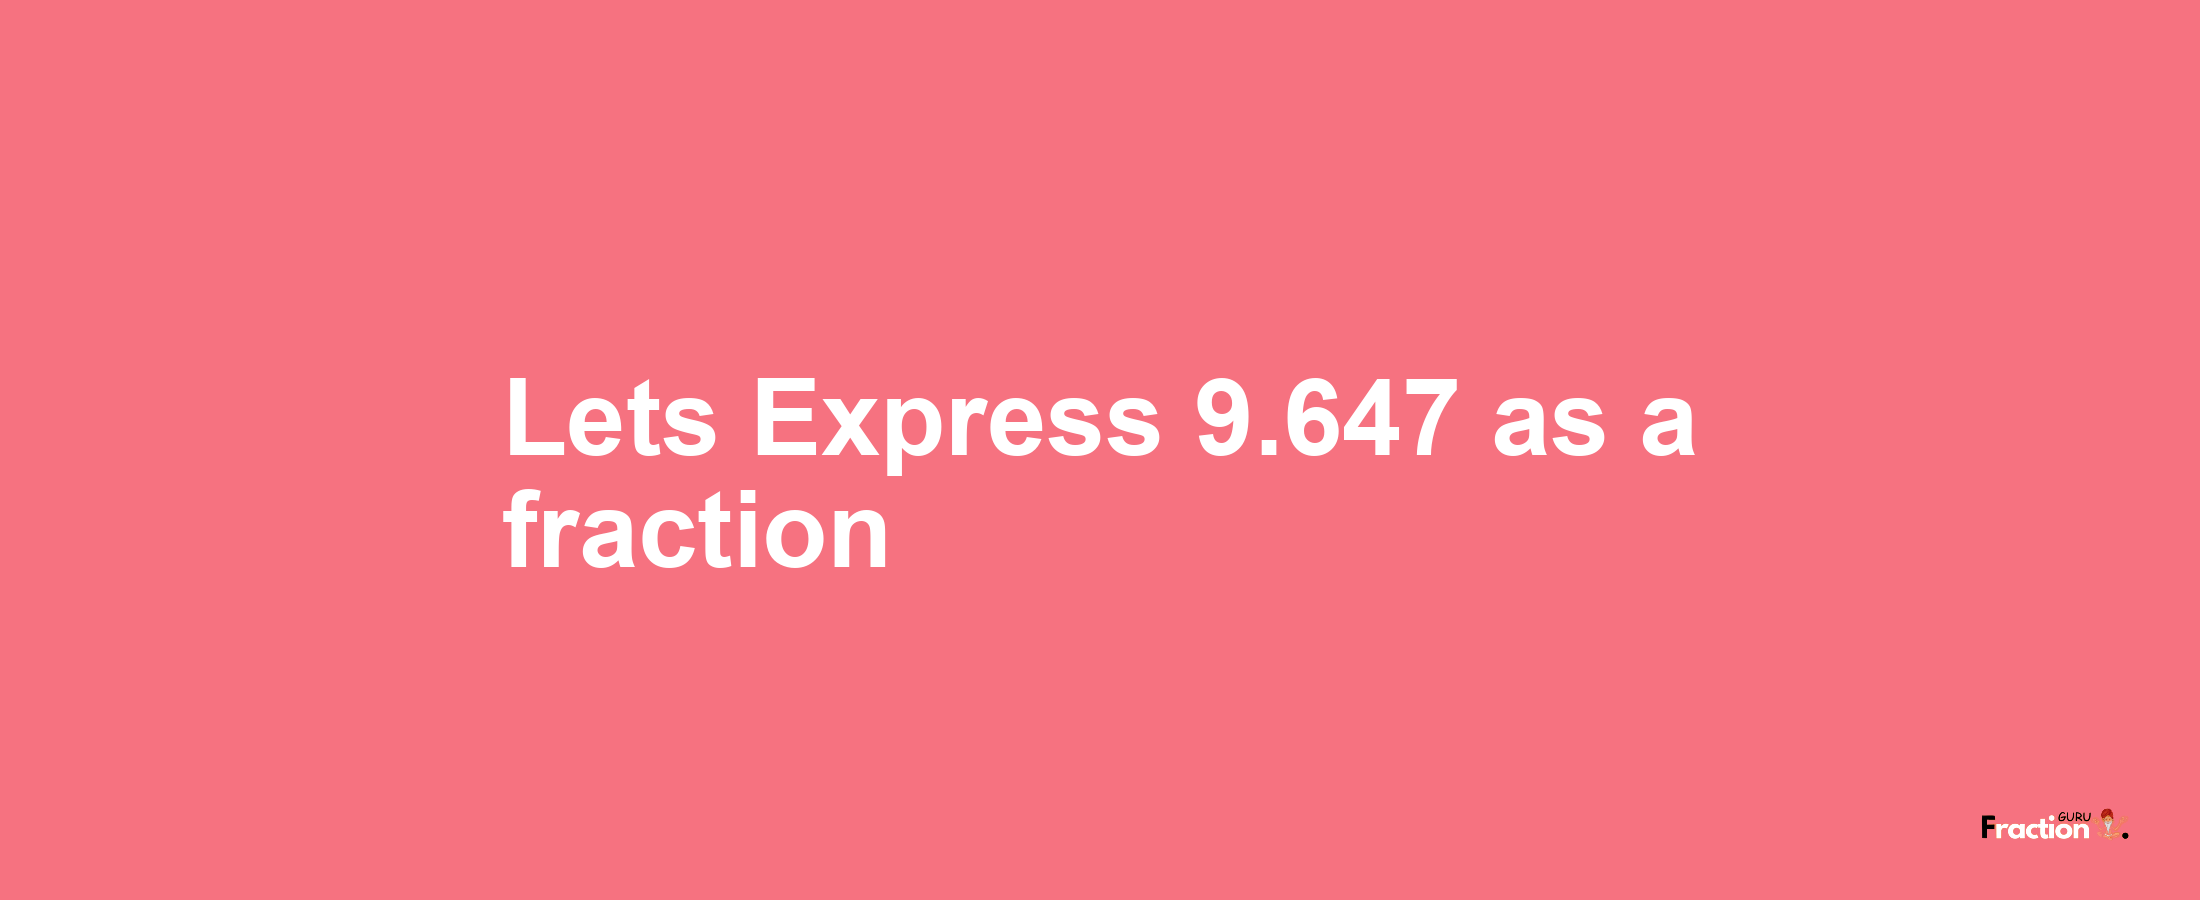 Lets Express 9.647 as afraction